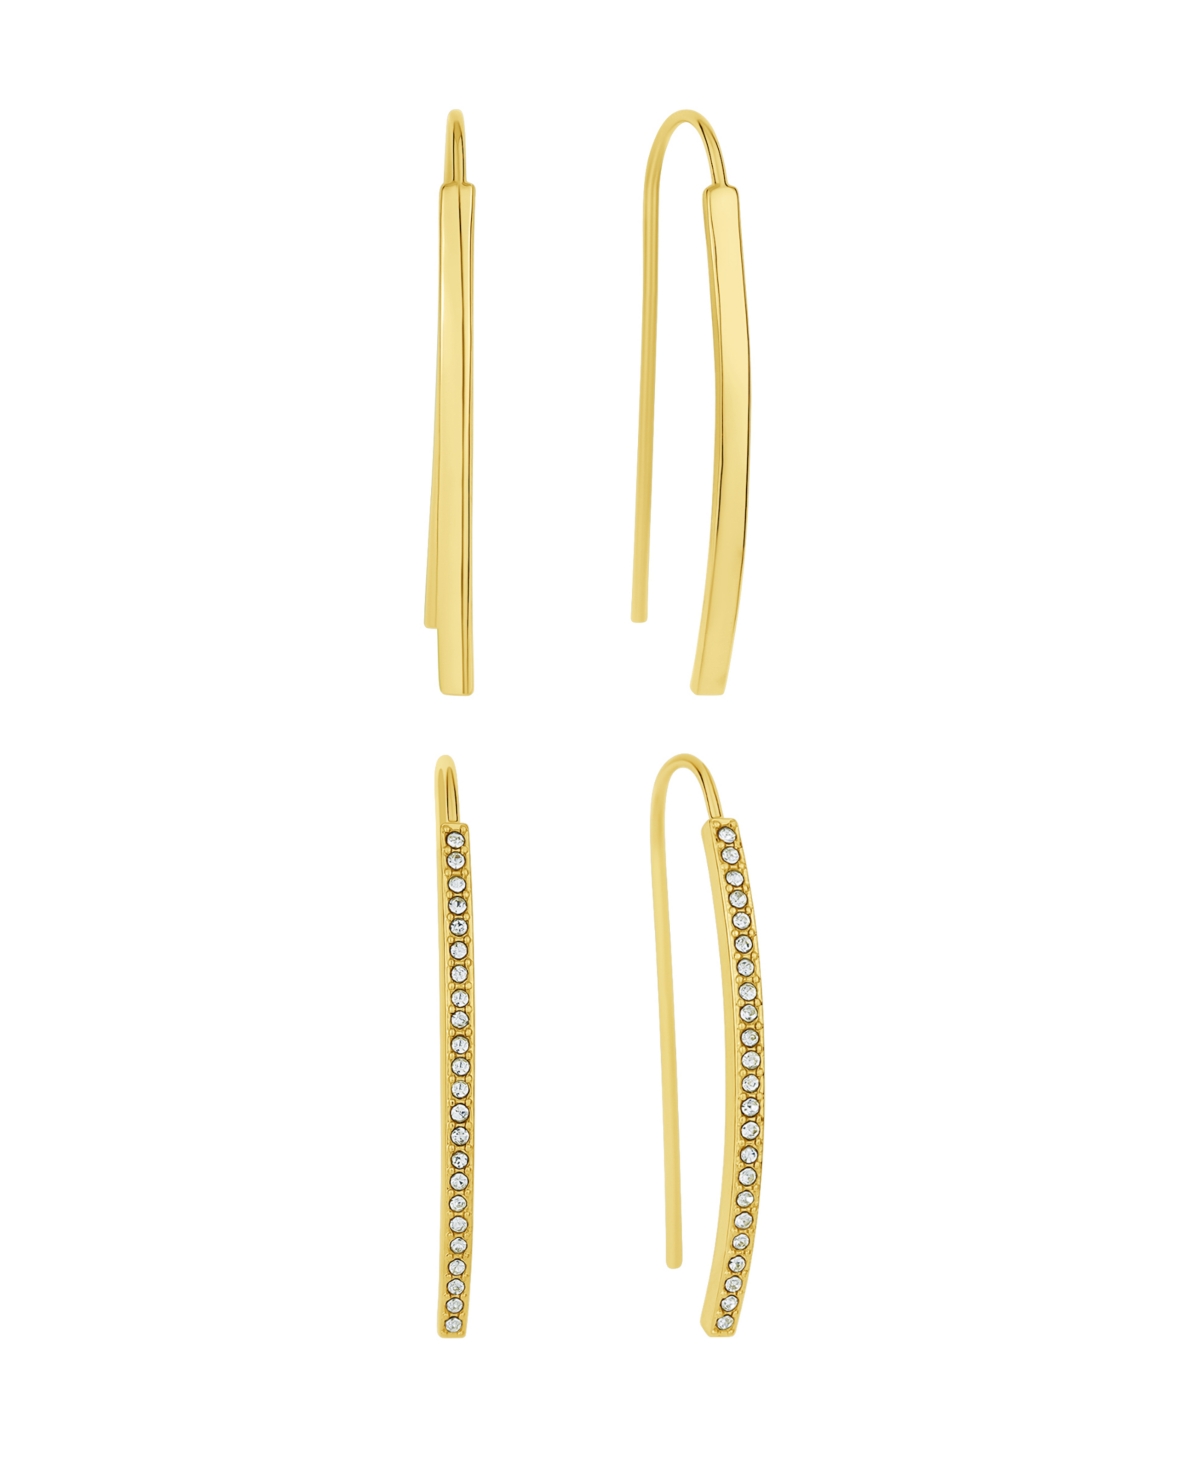 Crystal Curved Bar Earring Set - Gold Flash